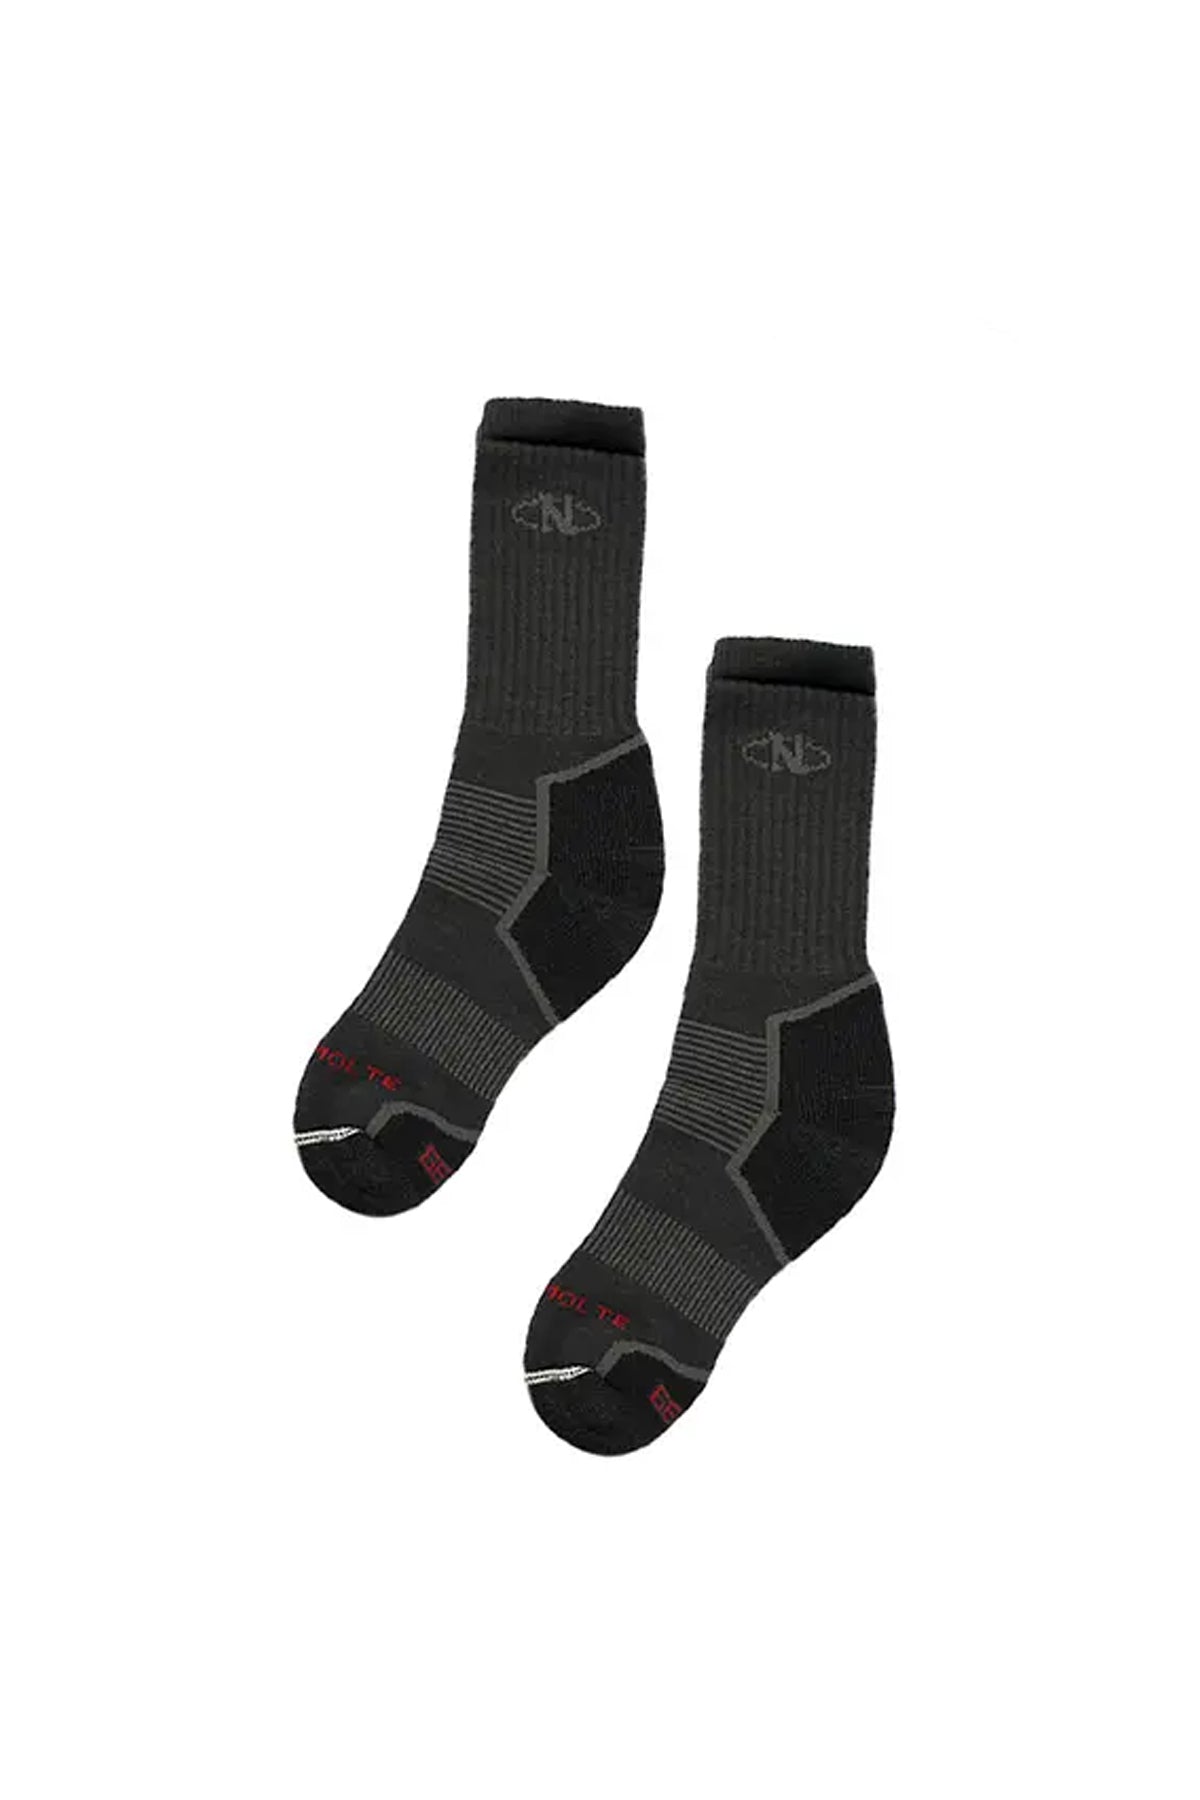 CALCETINES SENDERISMO NORTHLAND HIKING THERMOLITE GRIS 02-006981